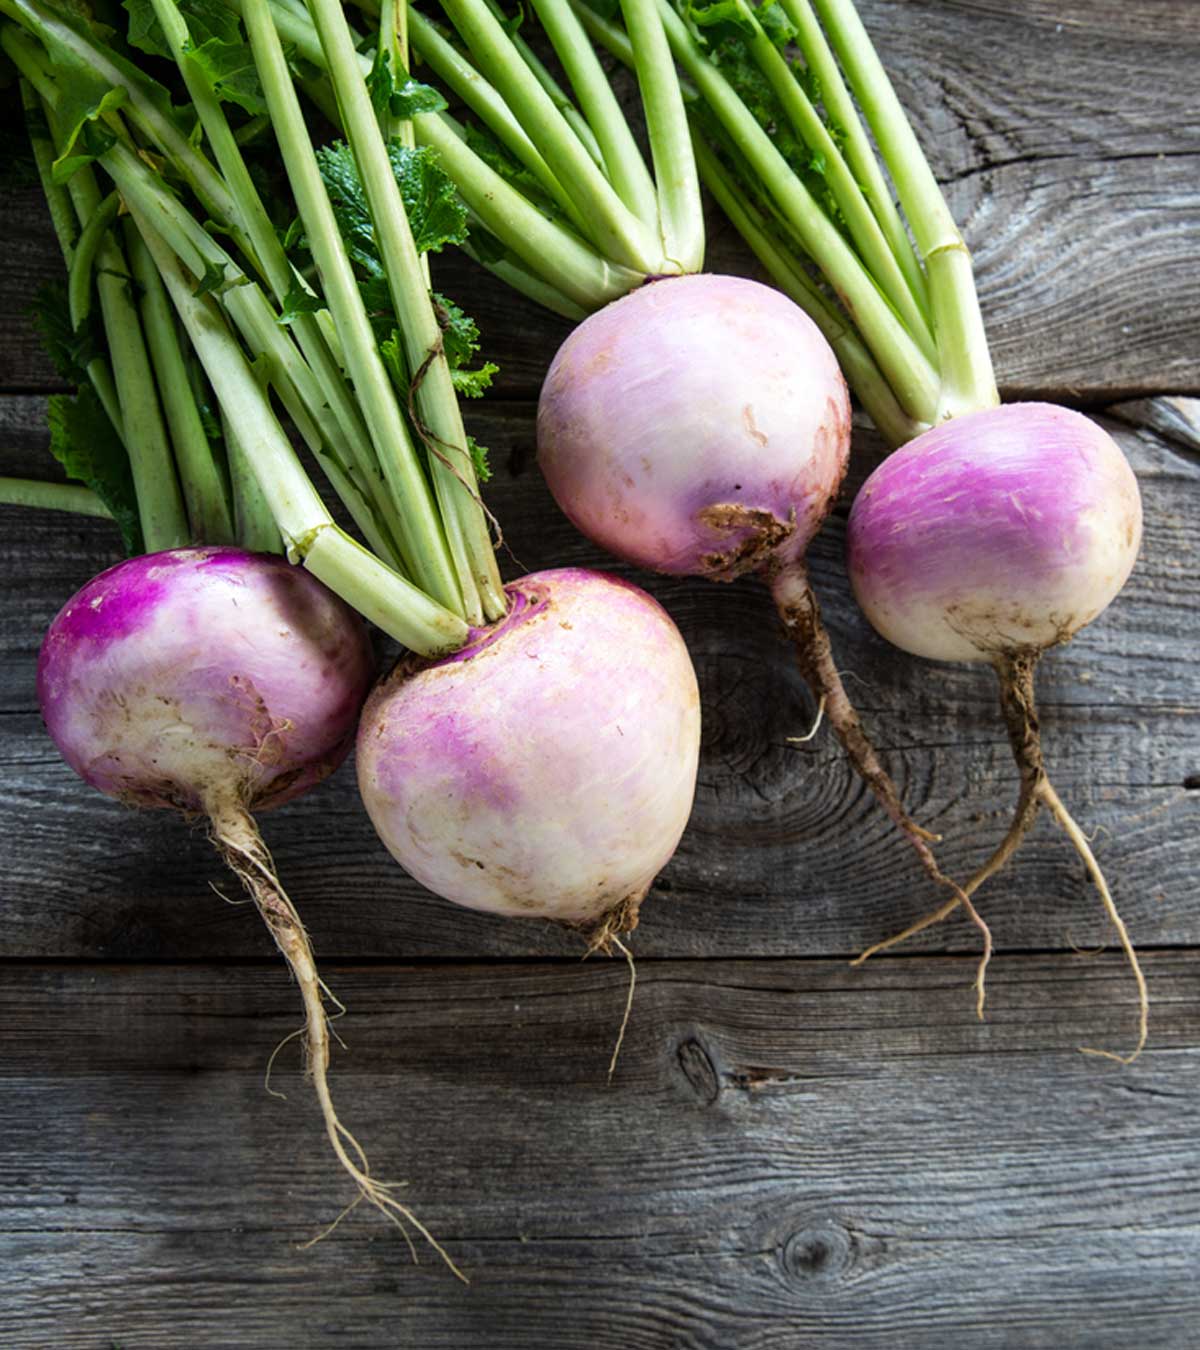 Turnip For Babies: Right Age, Benefits And Recipes To Try